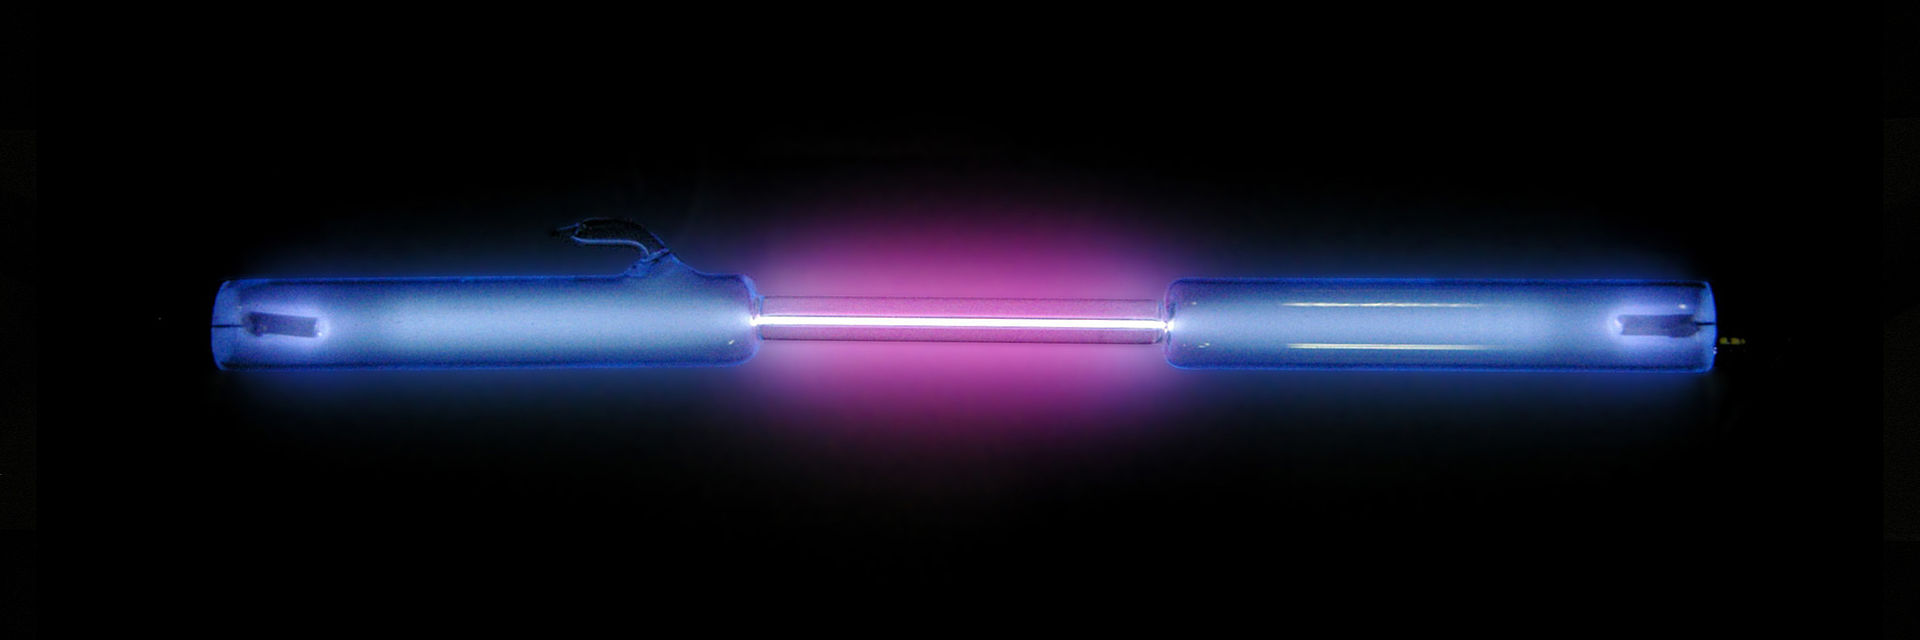 1920px-Hydrogen discharge tube